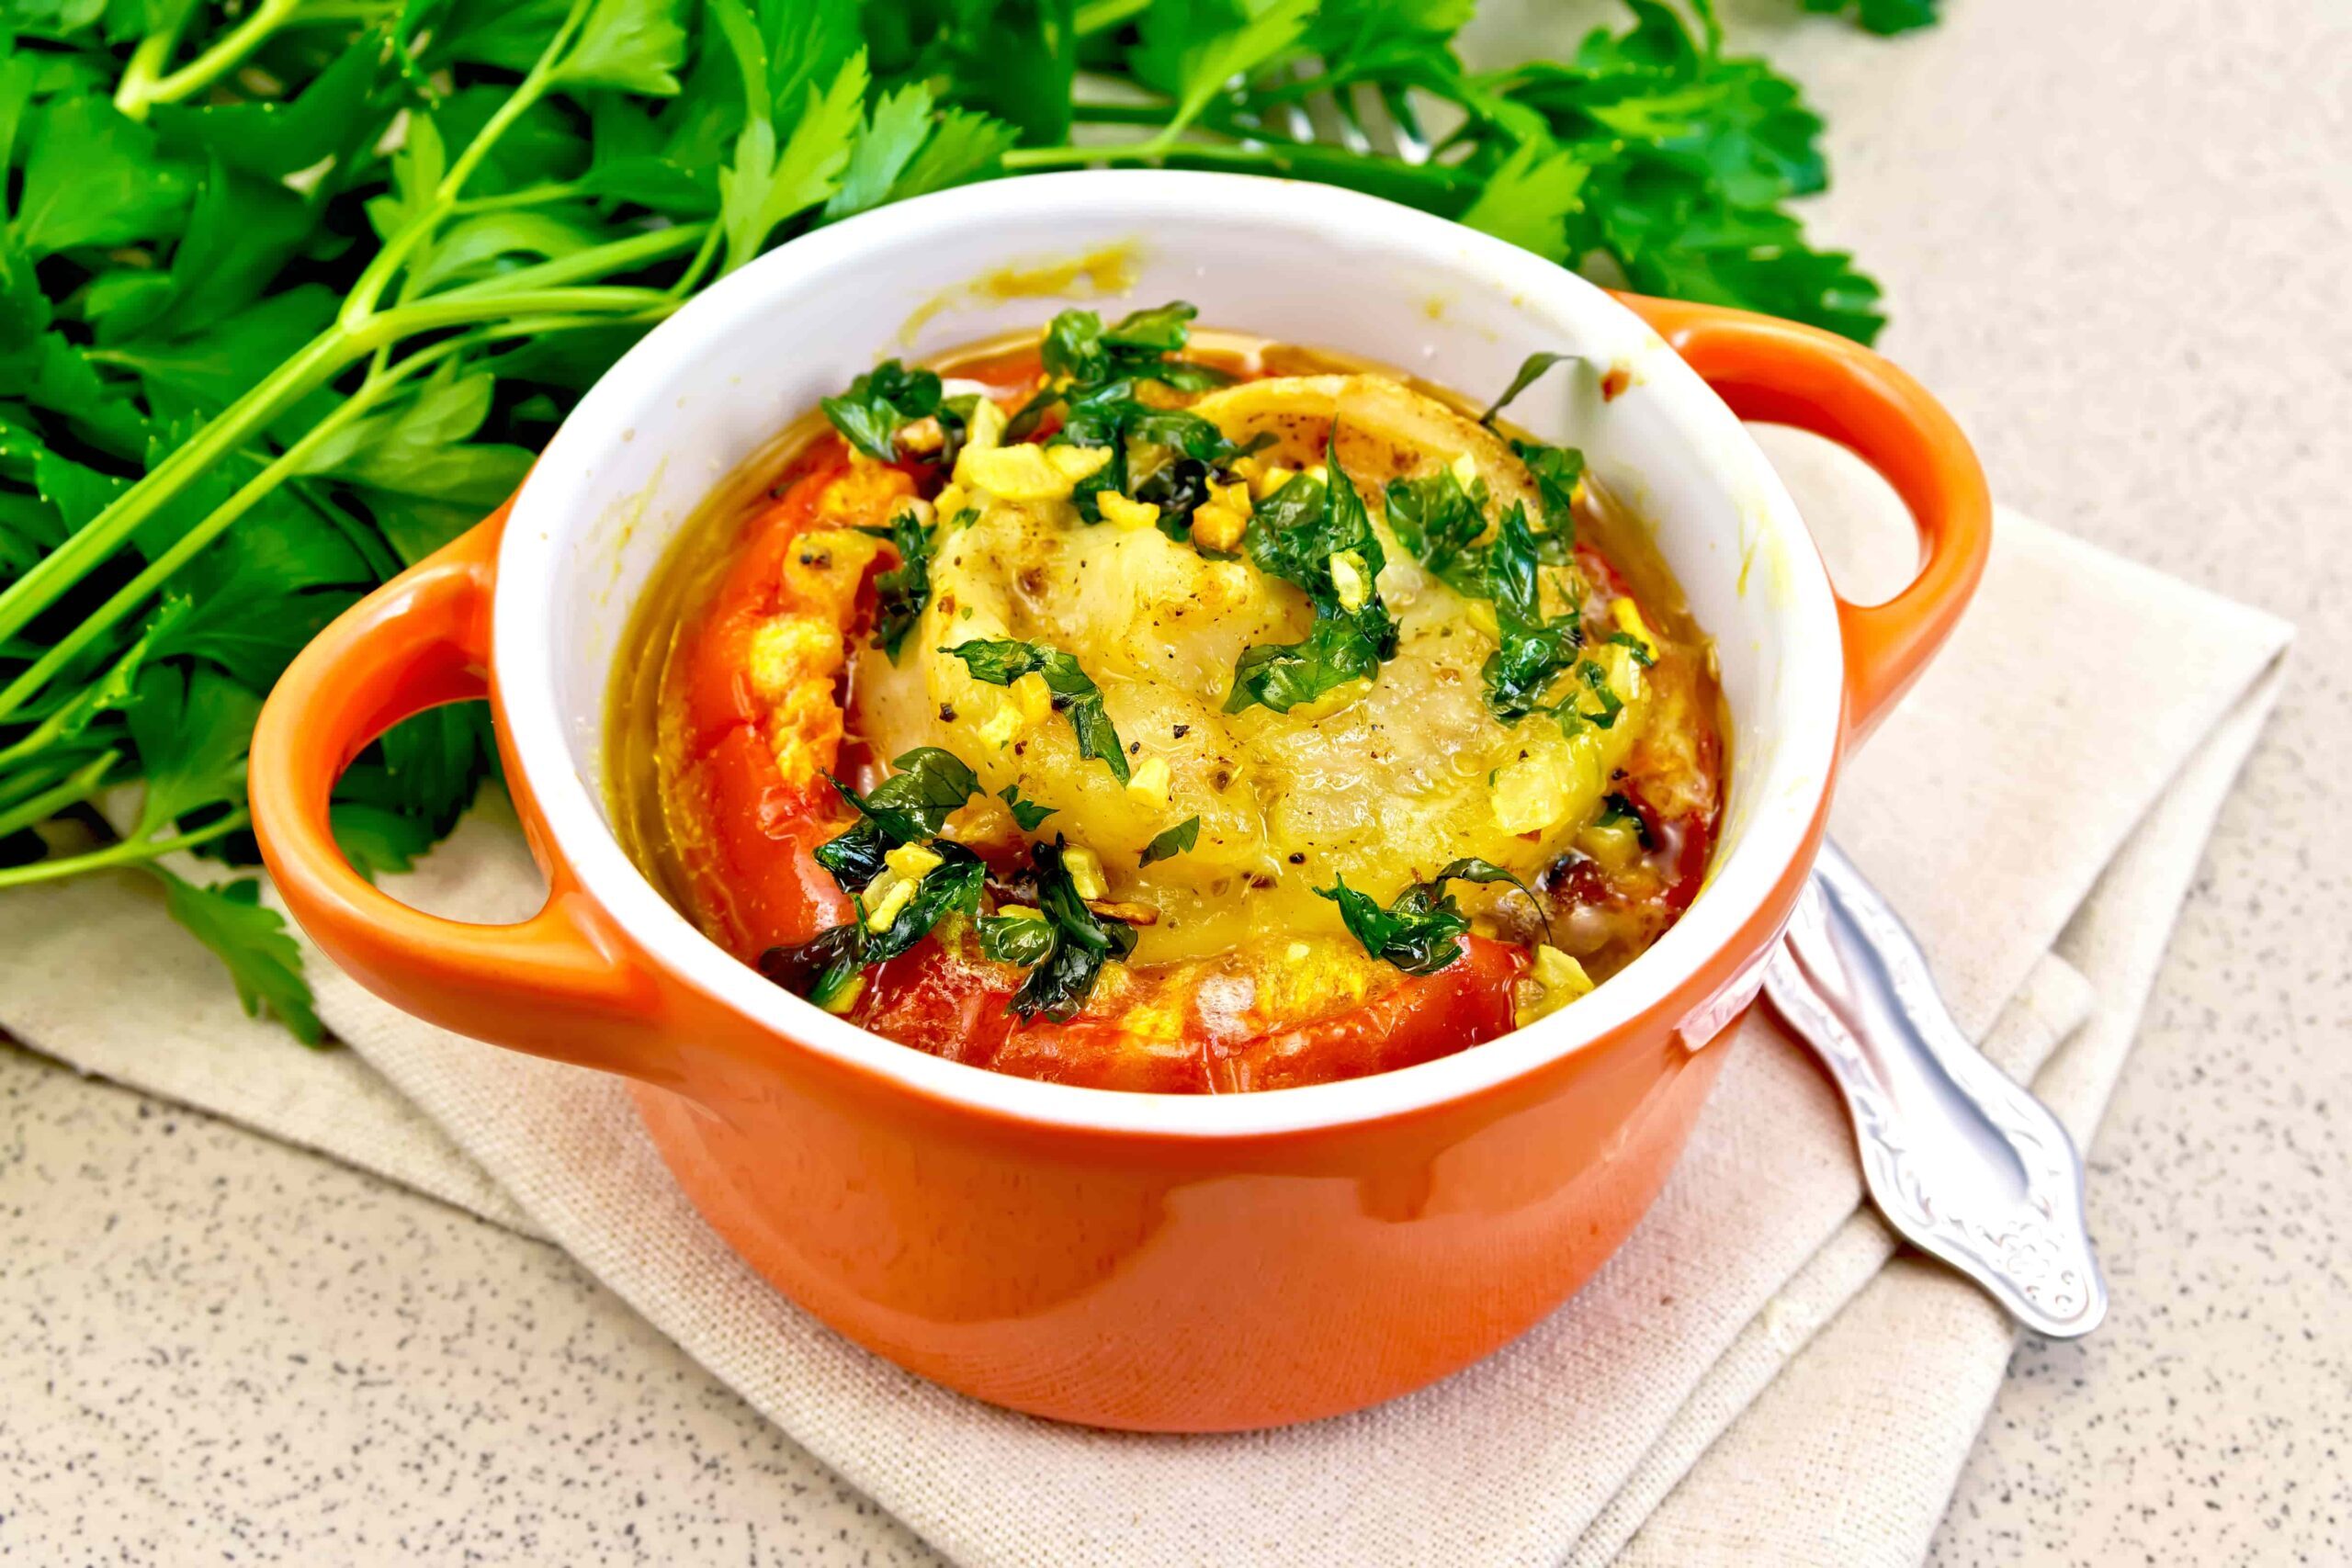 fish-baked-with-tomato-in-red-pot-on-granite-table-prxajw4-min-6940086